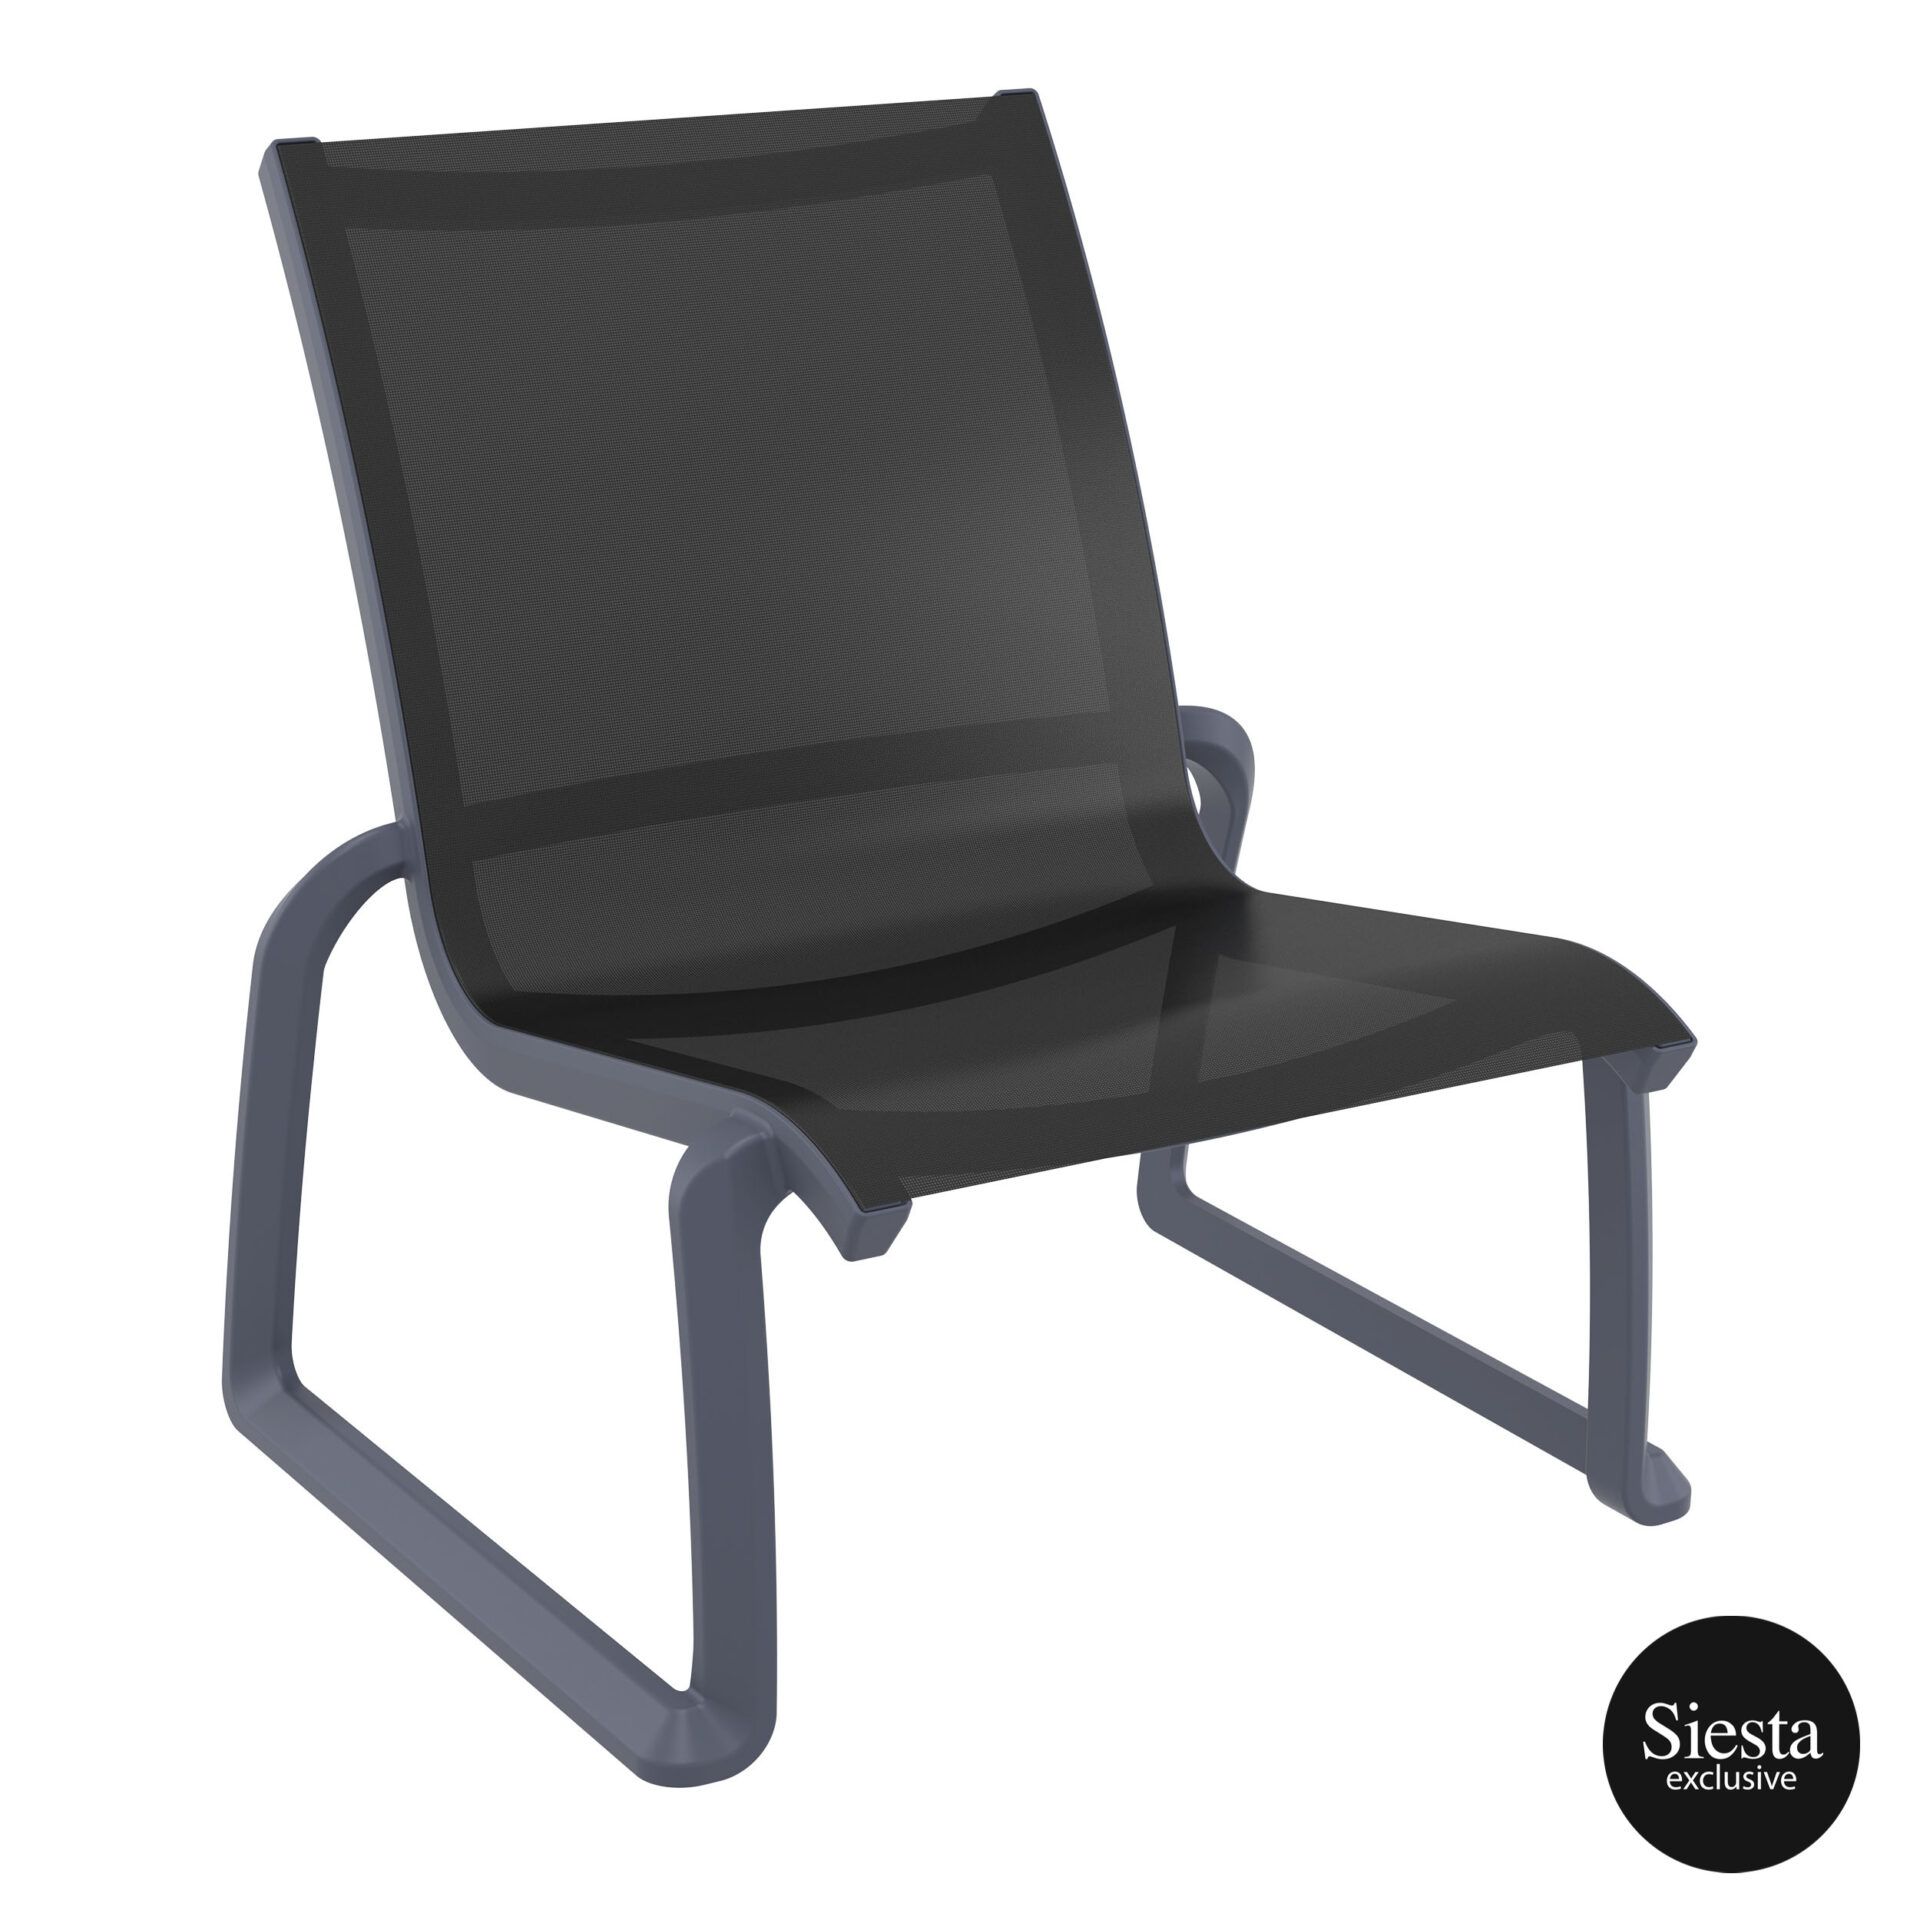 Pacific Lounge Chair - Anthracite/Black